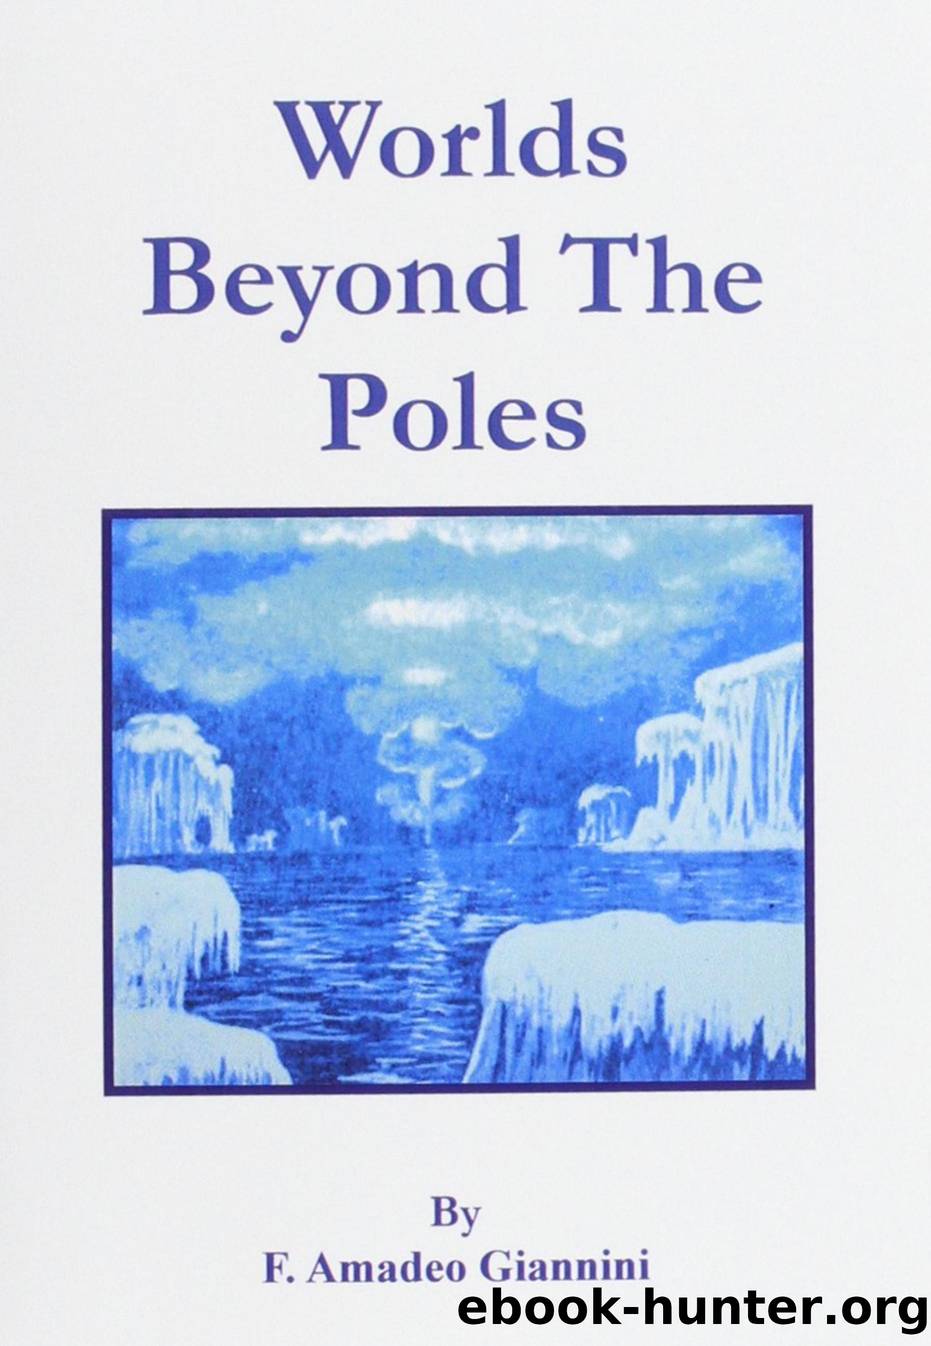 Worlds Beyond The Poles (Physical Continuity of the Universe) by Unknown